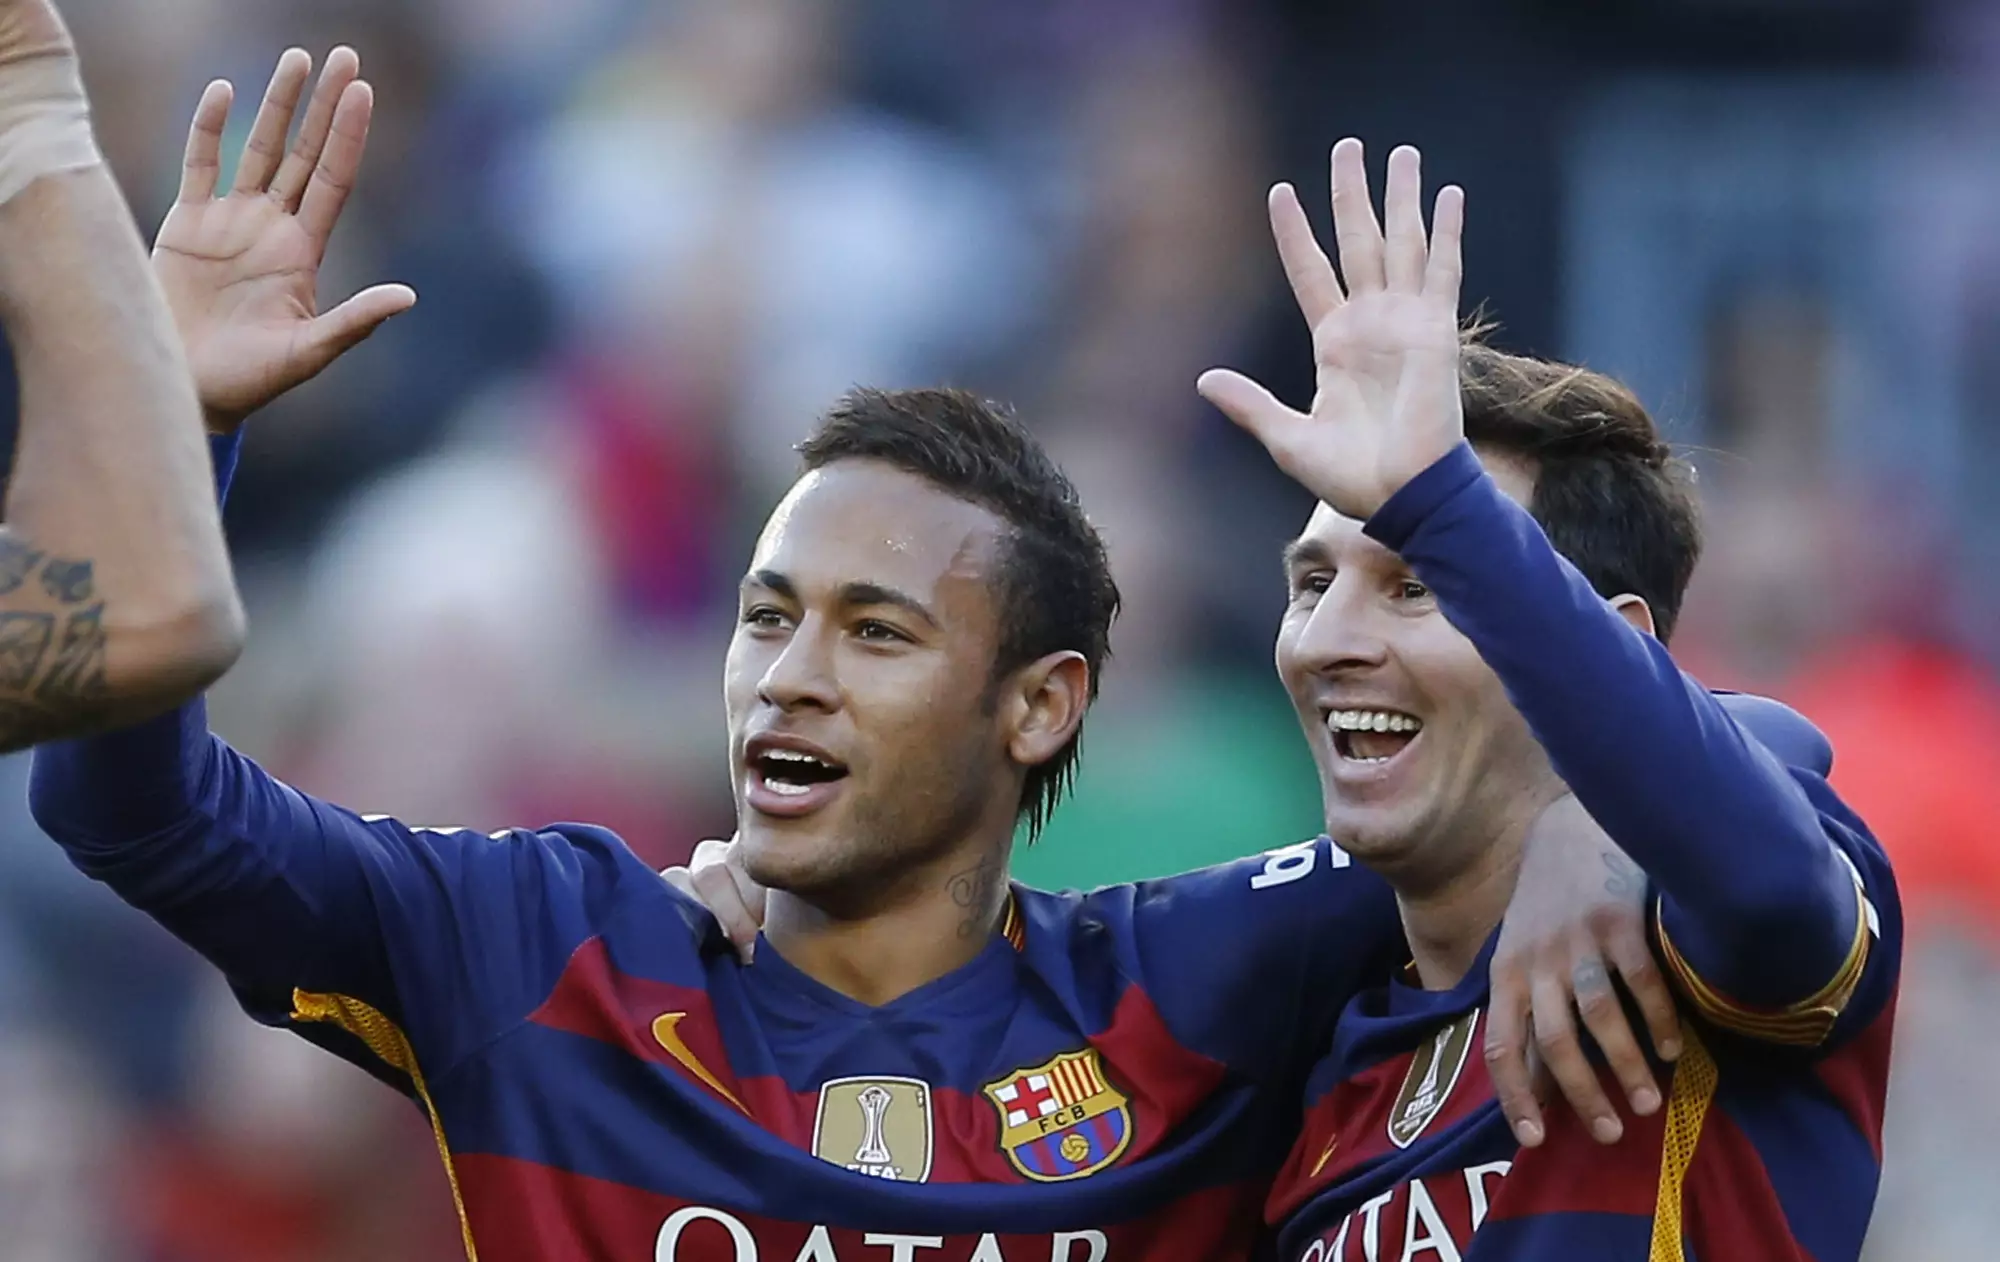 Could Neymar return to Barcelona? Image: PA Images